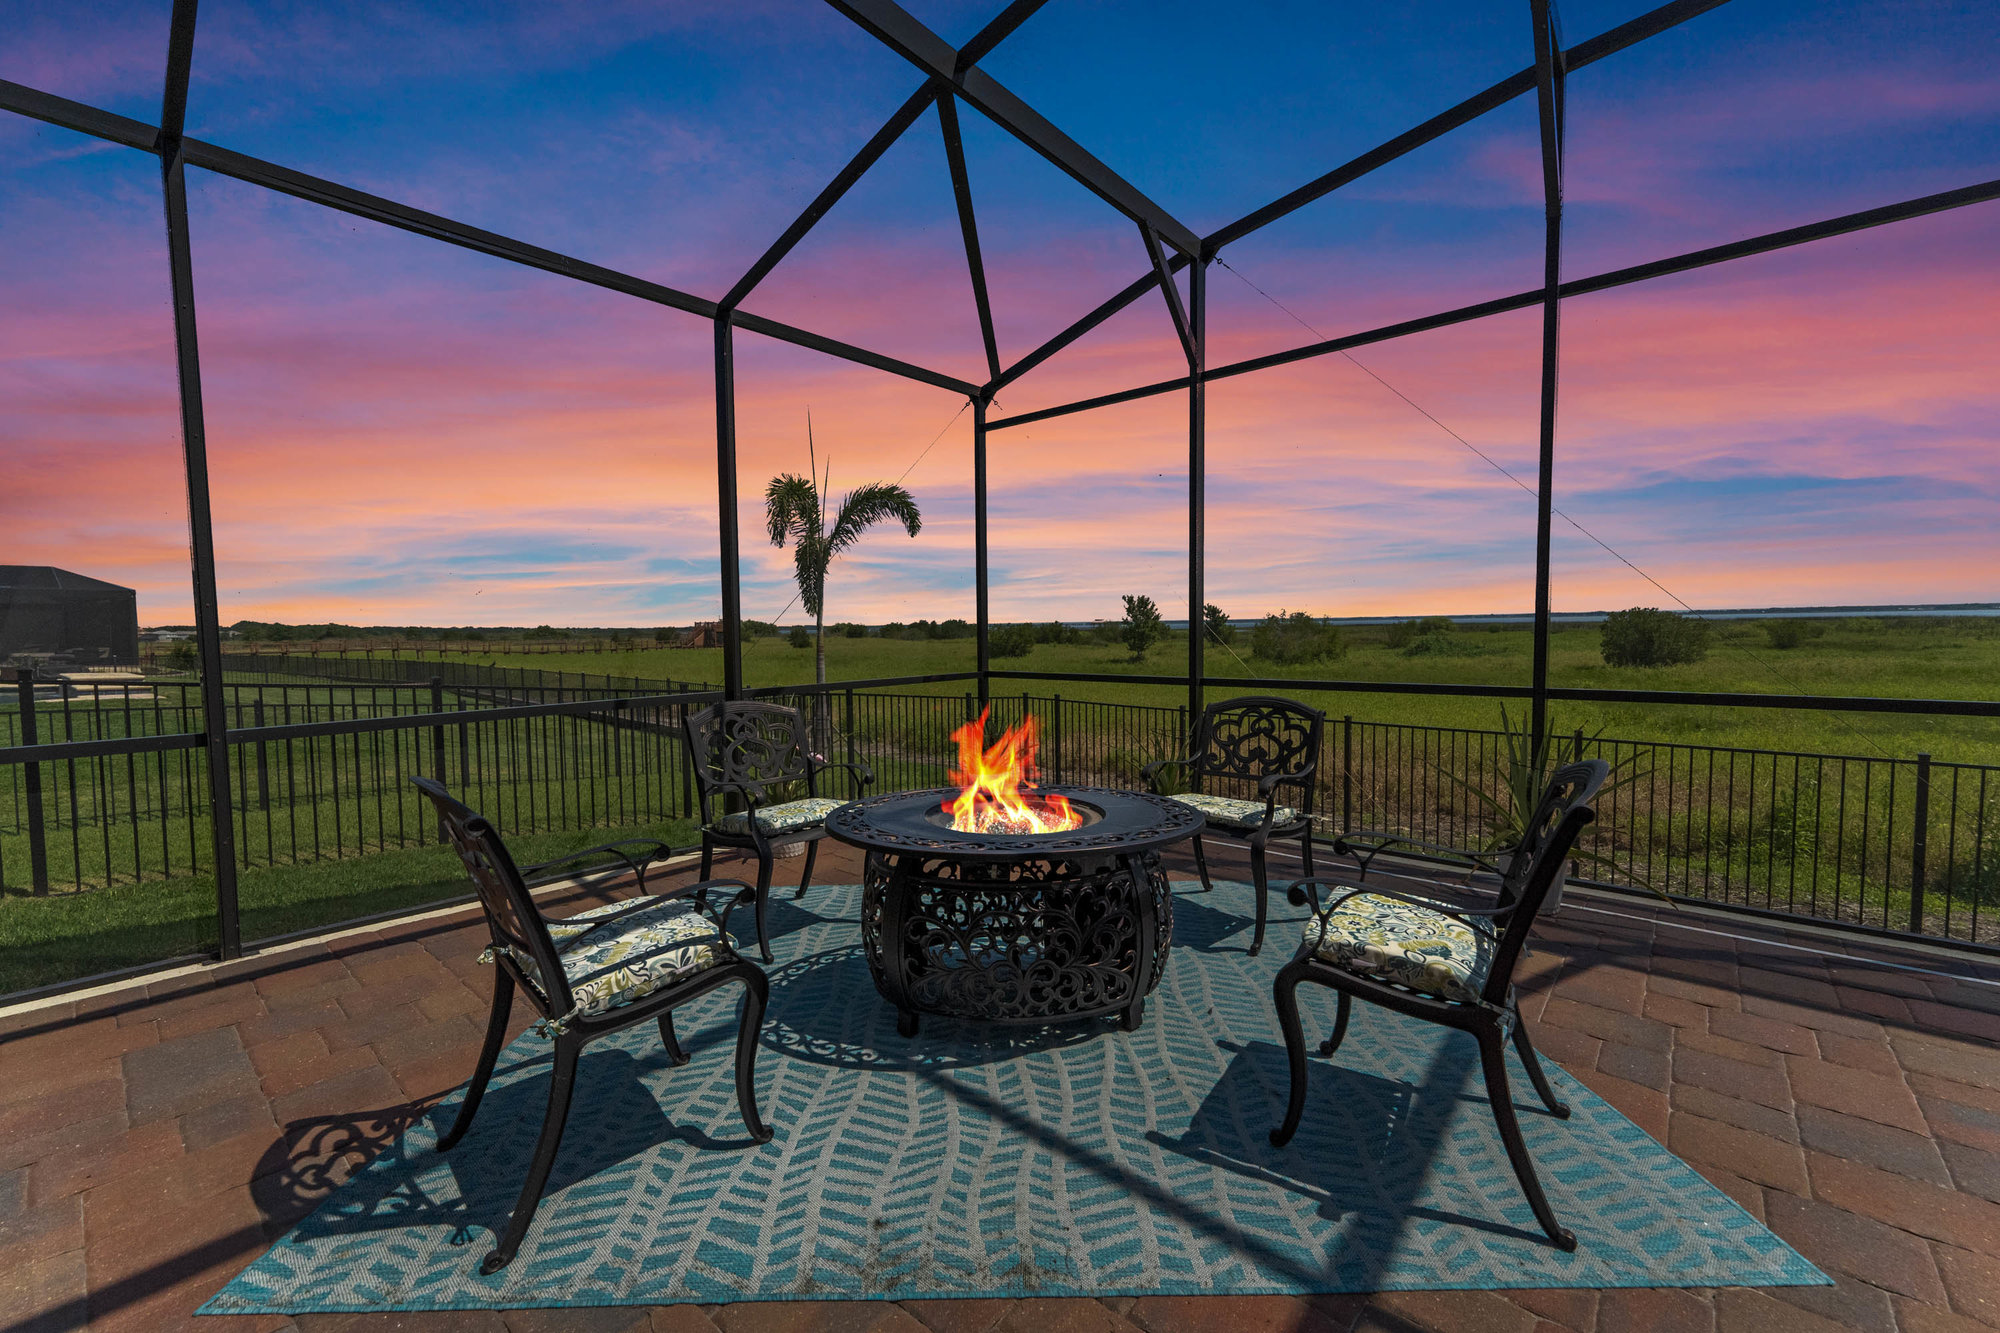 fire pit lit at night with metal chairs around